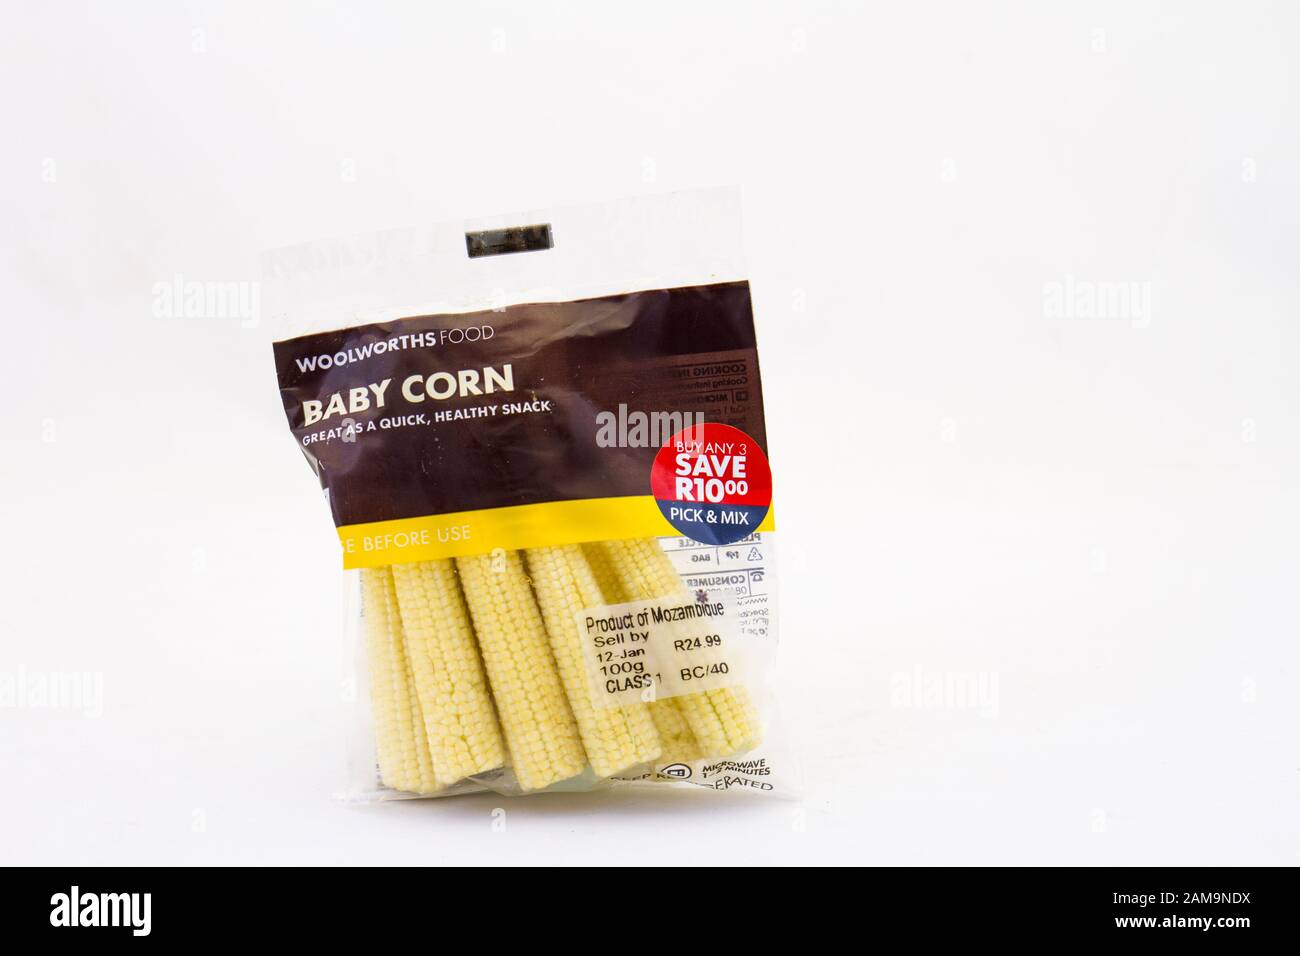 Alberton, South Africa - a packet of Woolworths Food baby corn imported from Mozambique isolated on a white background image in horizontal format Stock Photo